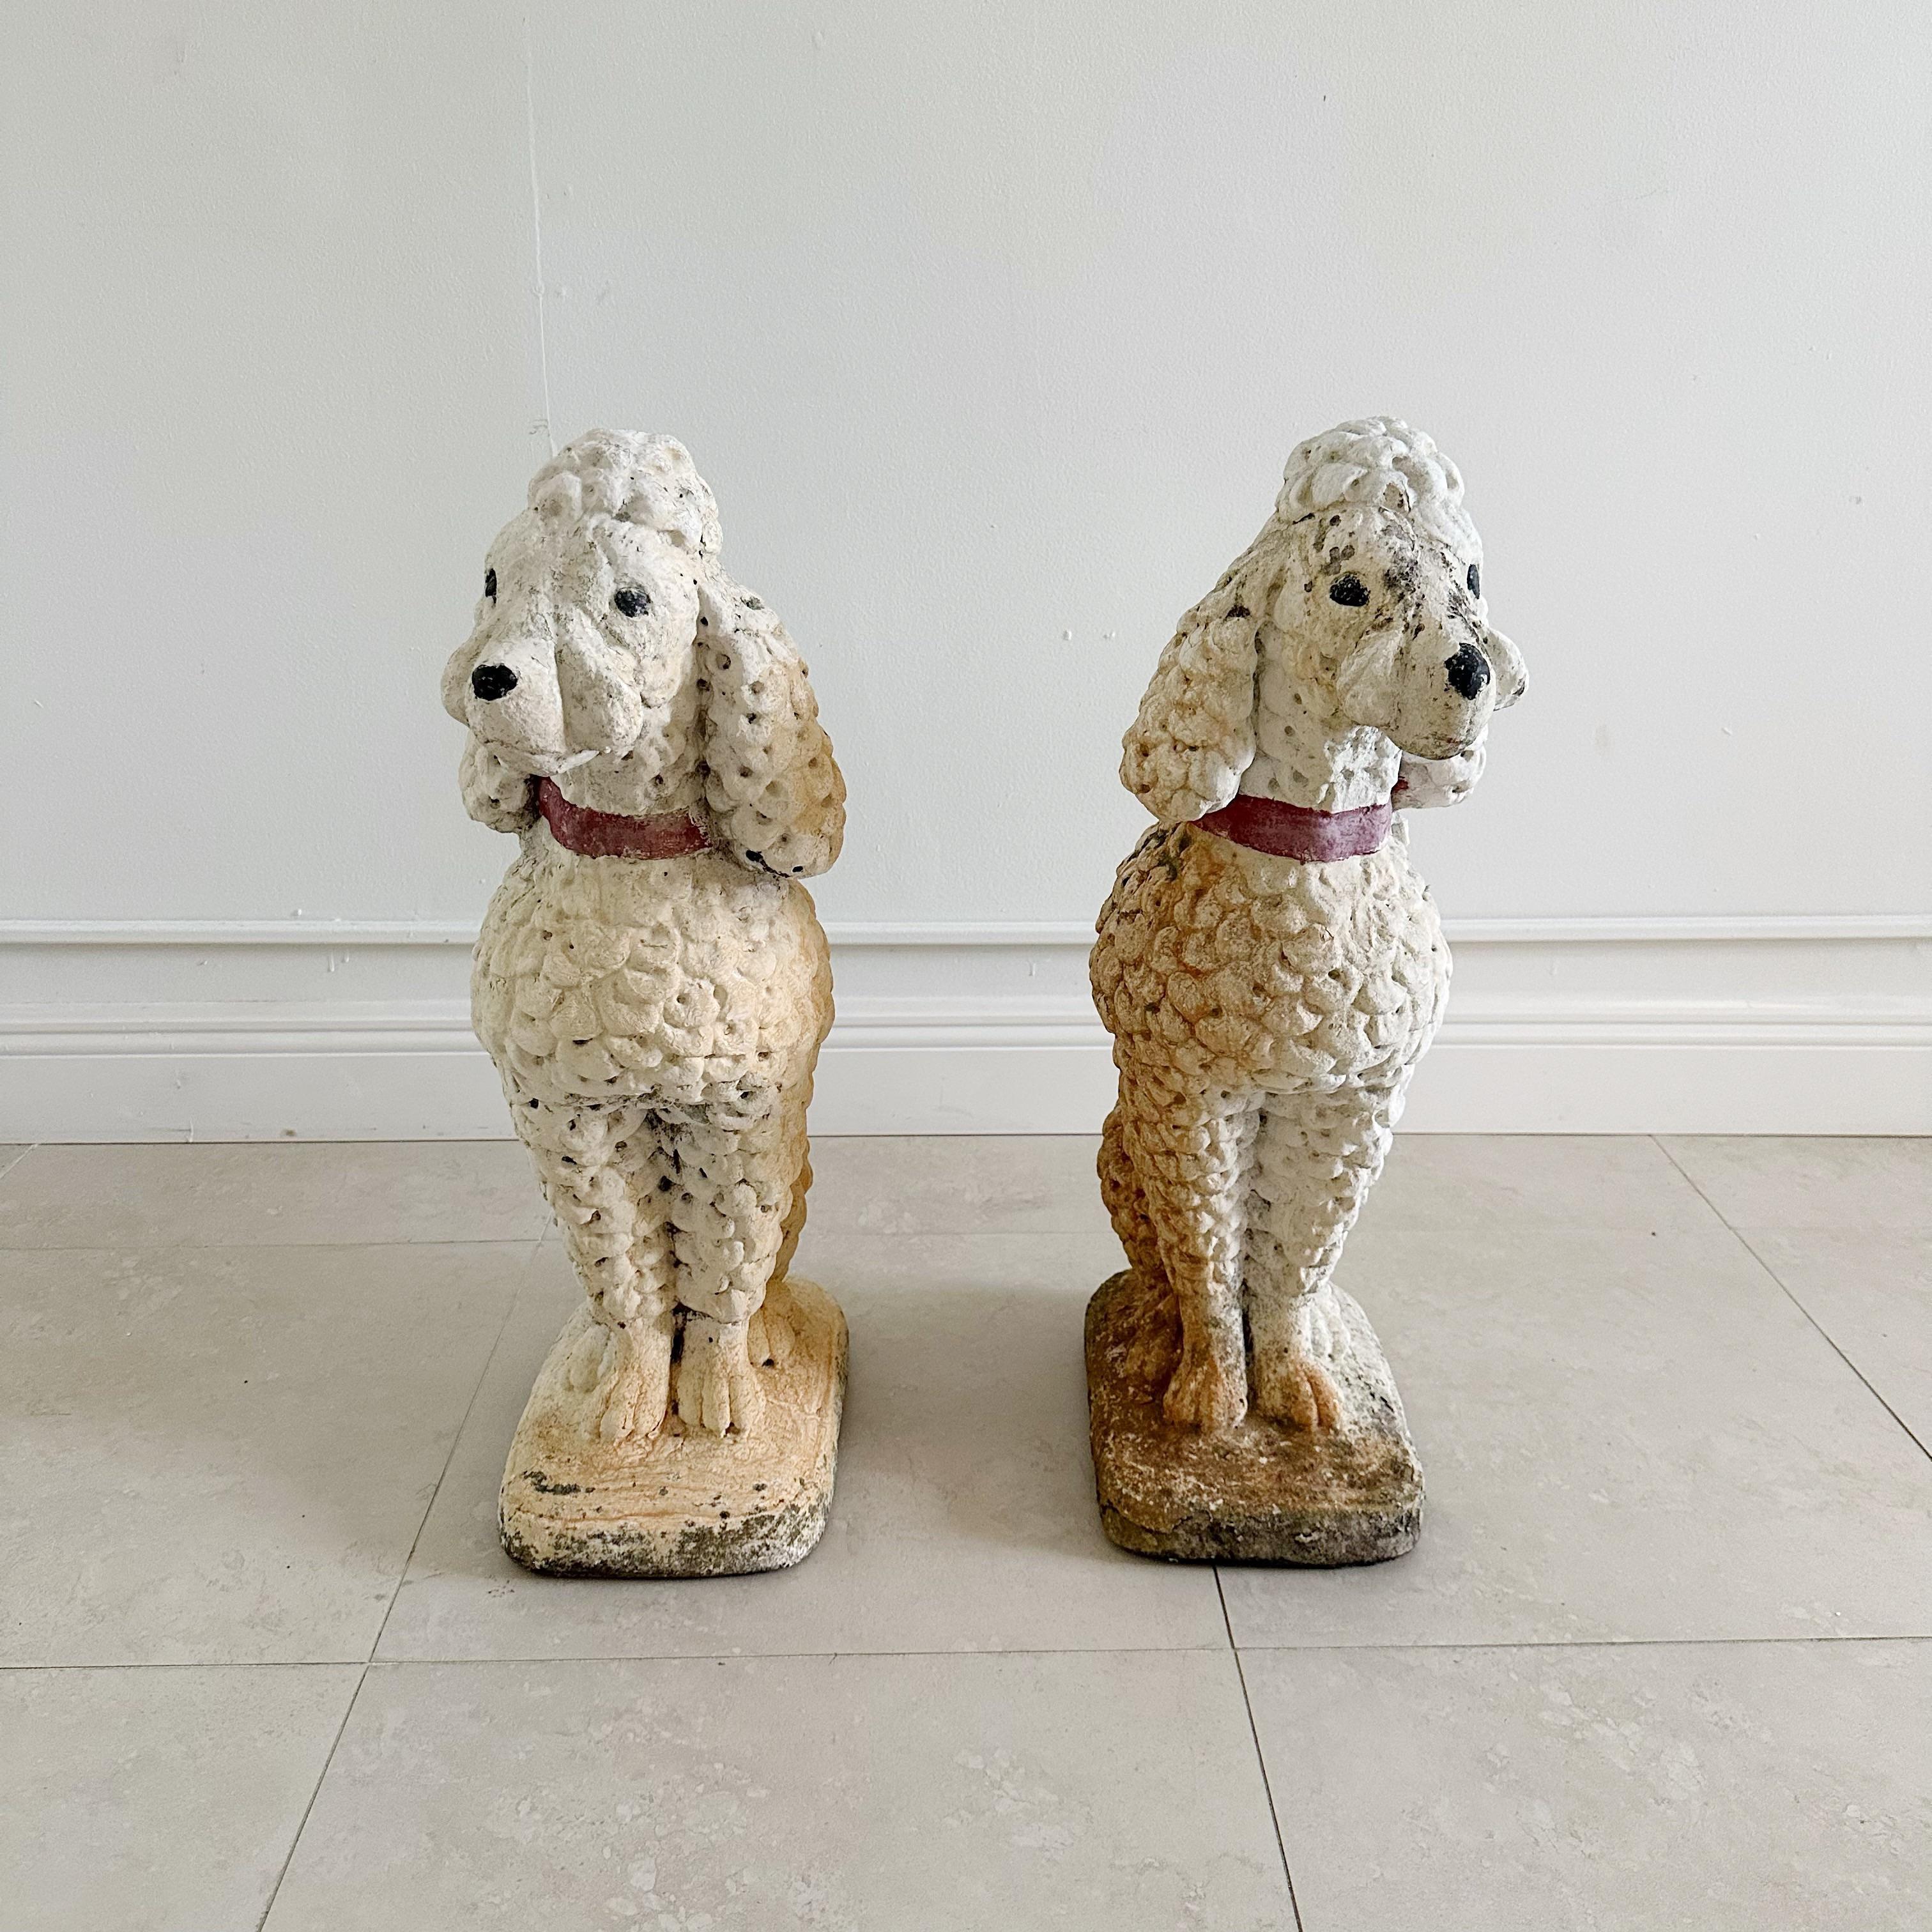 A delightful pair of vintage cement poodles, adorned with charming red collars and displaying a beautifully distressed white paint finish that has acquired character over time. These endearing pieces are versatile, perfectly suited for both outdoor